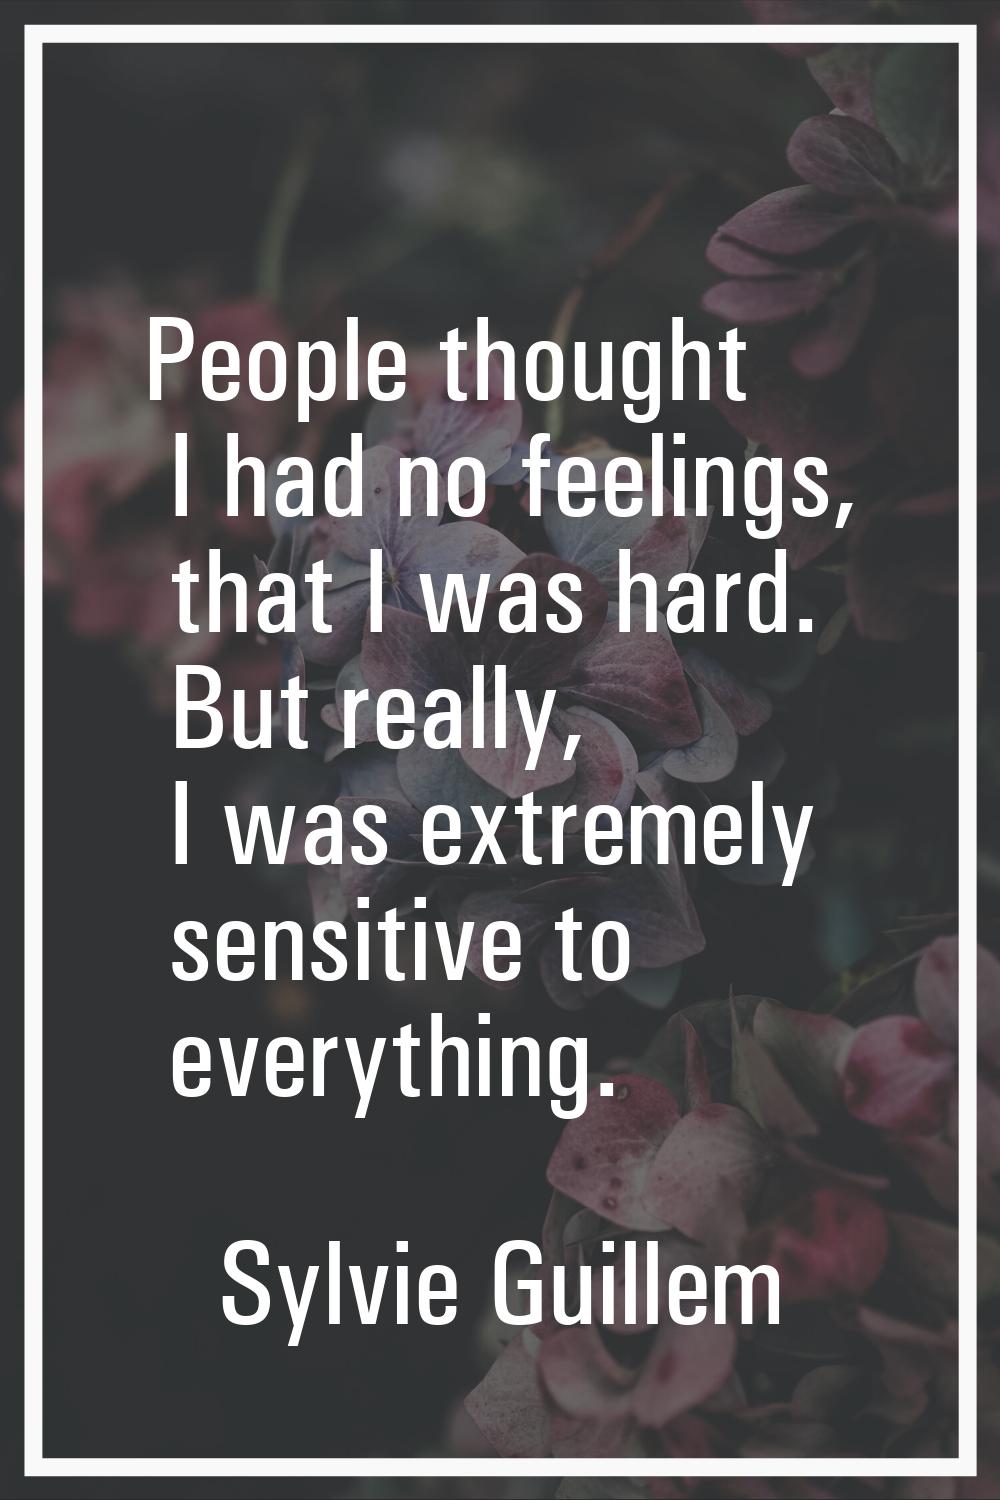 People thought I had no feelings, that I was hard. But really, I was extremely sensitive to everyth